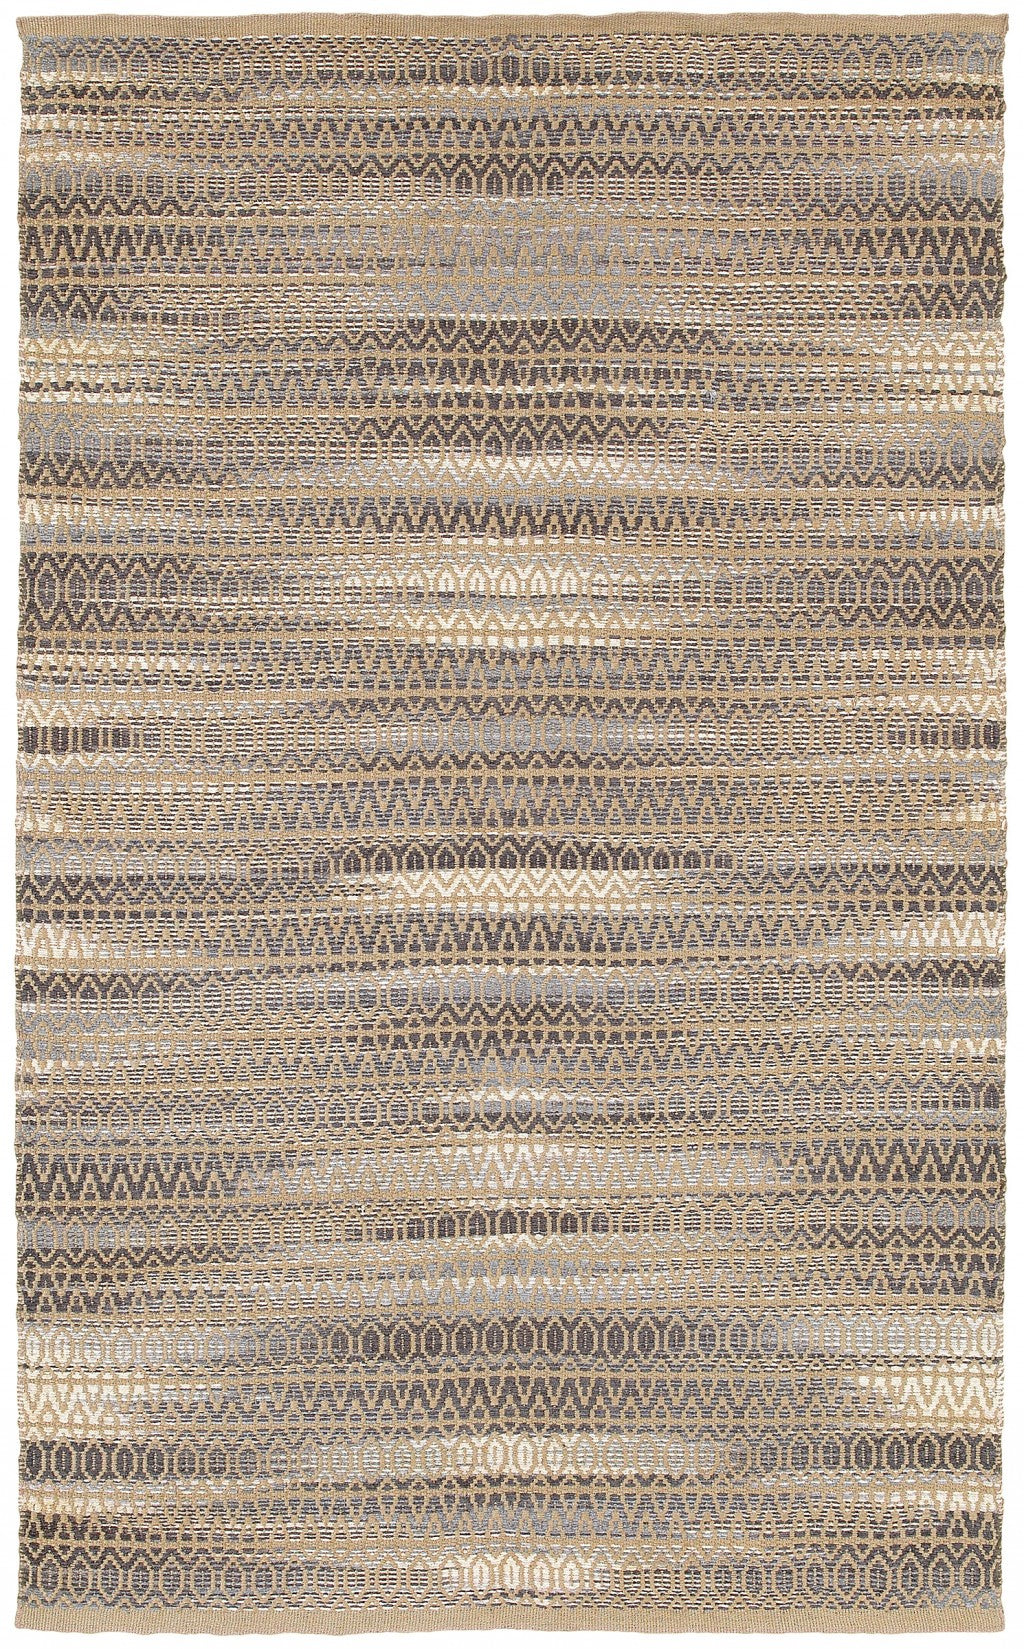 5’ x 8’ Gray and Tan Striated Runner Rug